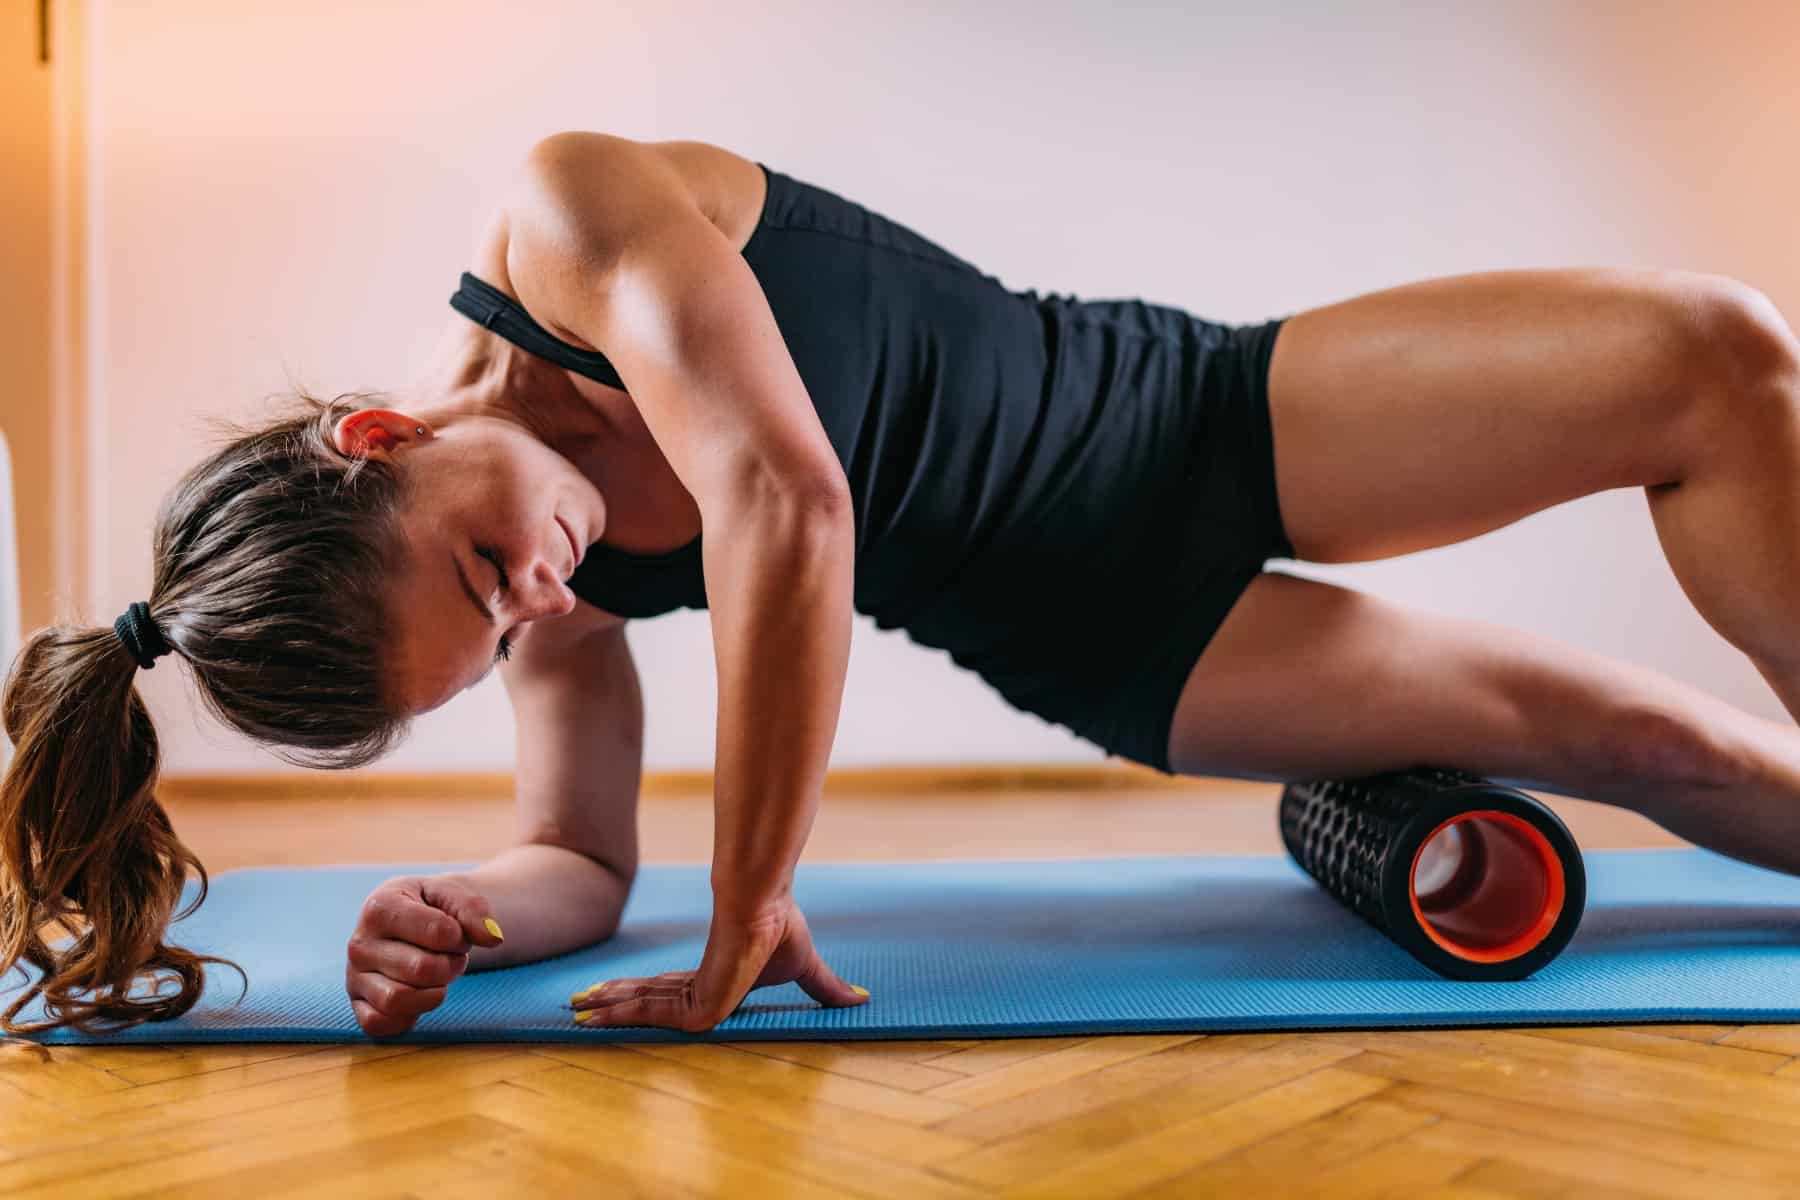 How to Use a Foam Roller for Hip Flexor Tension - Steel Supplements